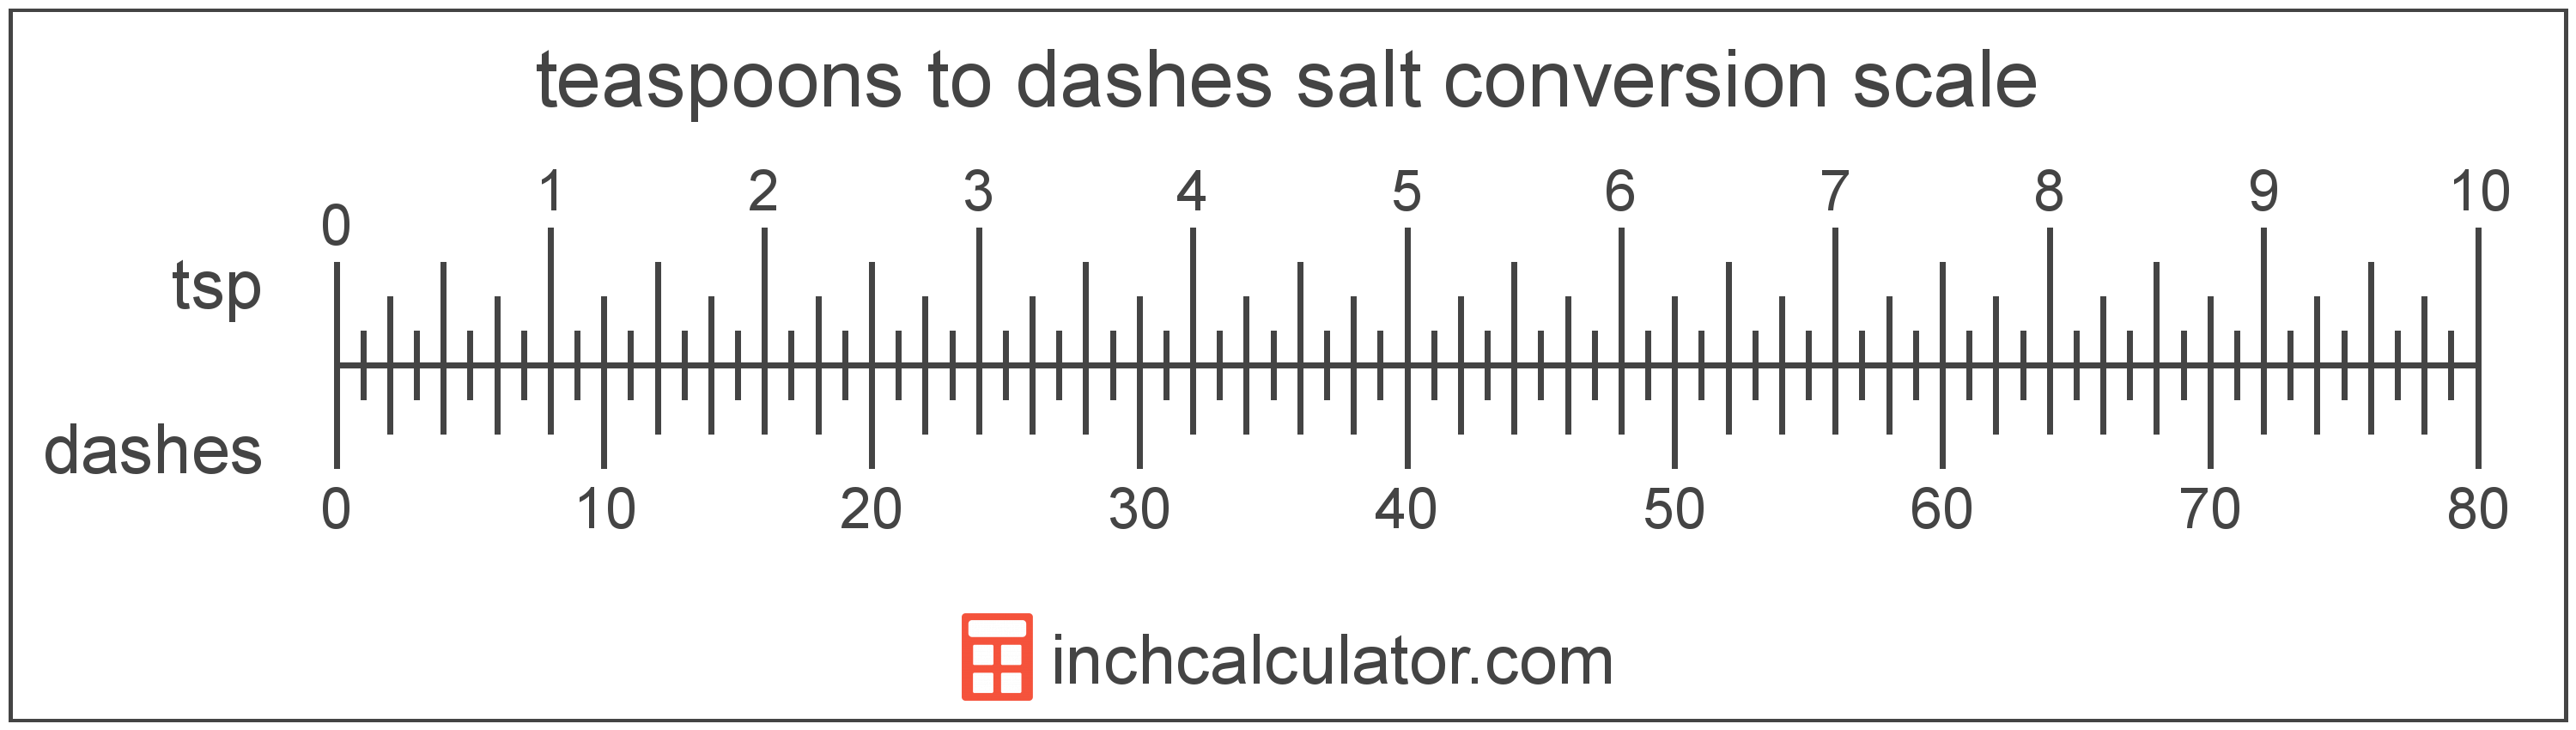 conversion scale showing teaspoons and equivalent dashes salt volume values